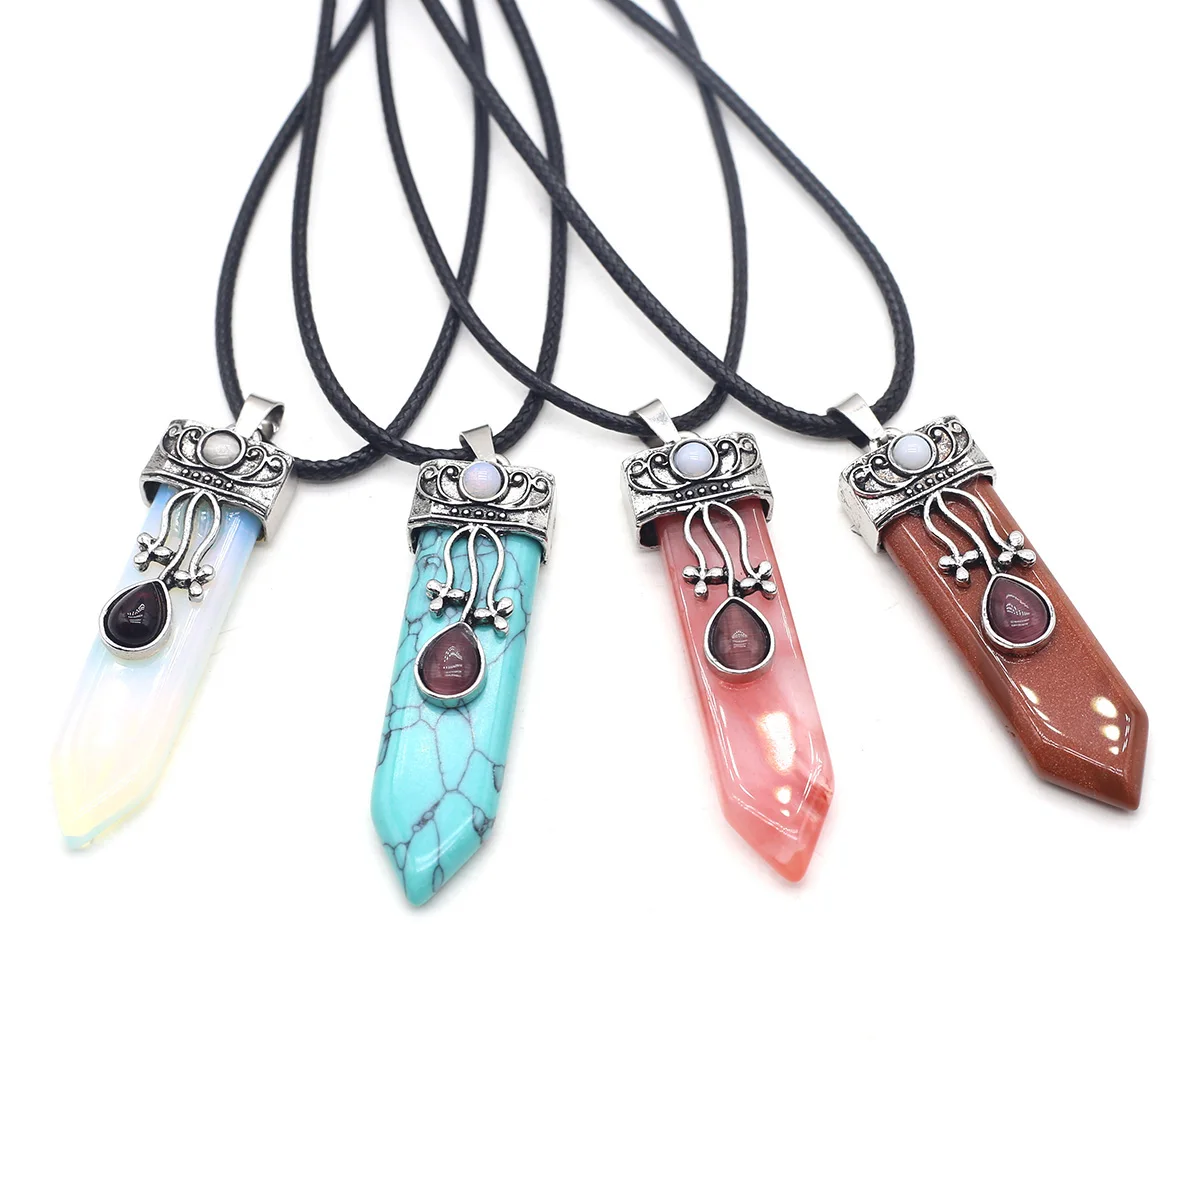 

Rope Chain Reiki Healing Natural Stone Sword Shape Pendant Necklace For Women And Men Exquisite Jewelry Gift 15x58mm